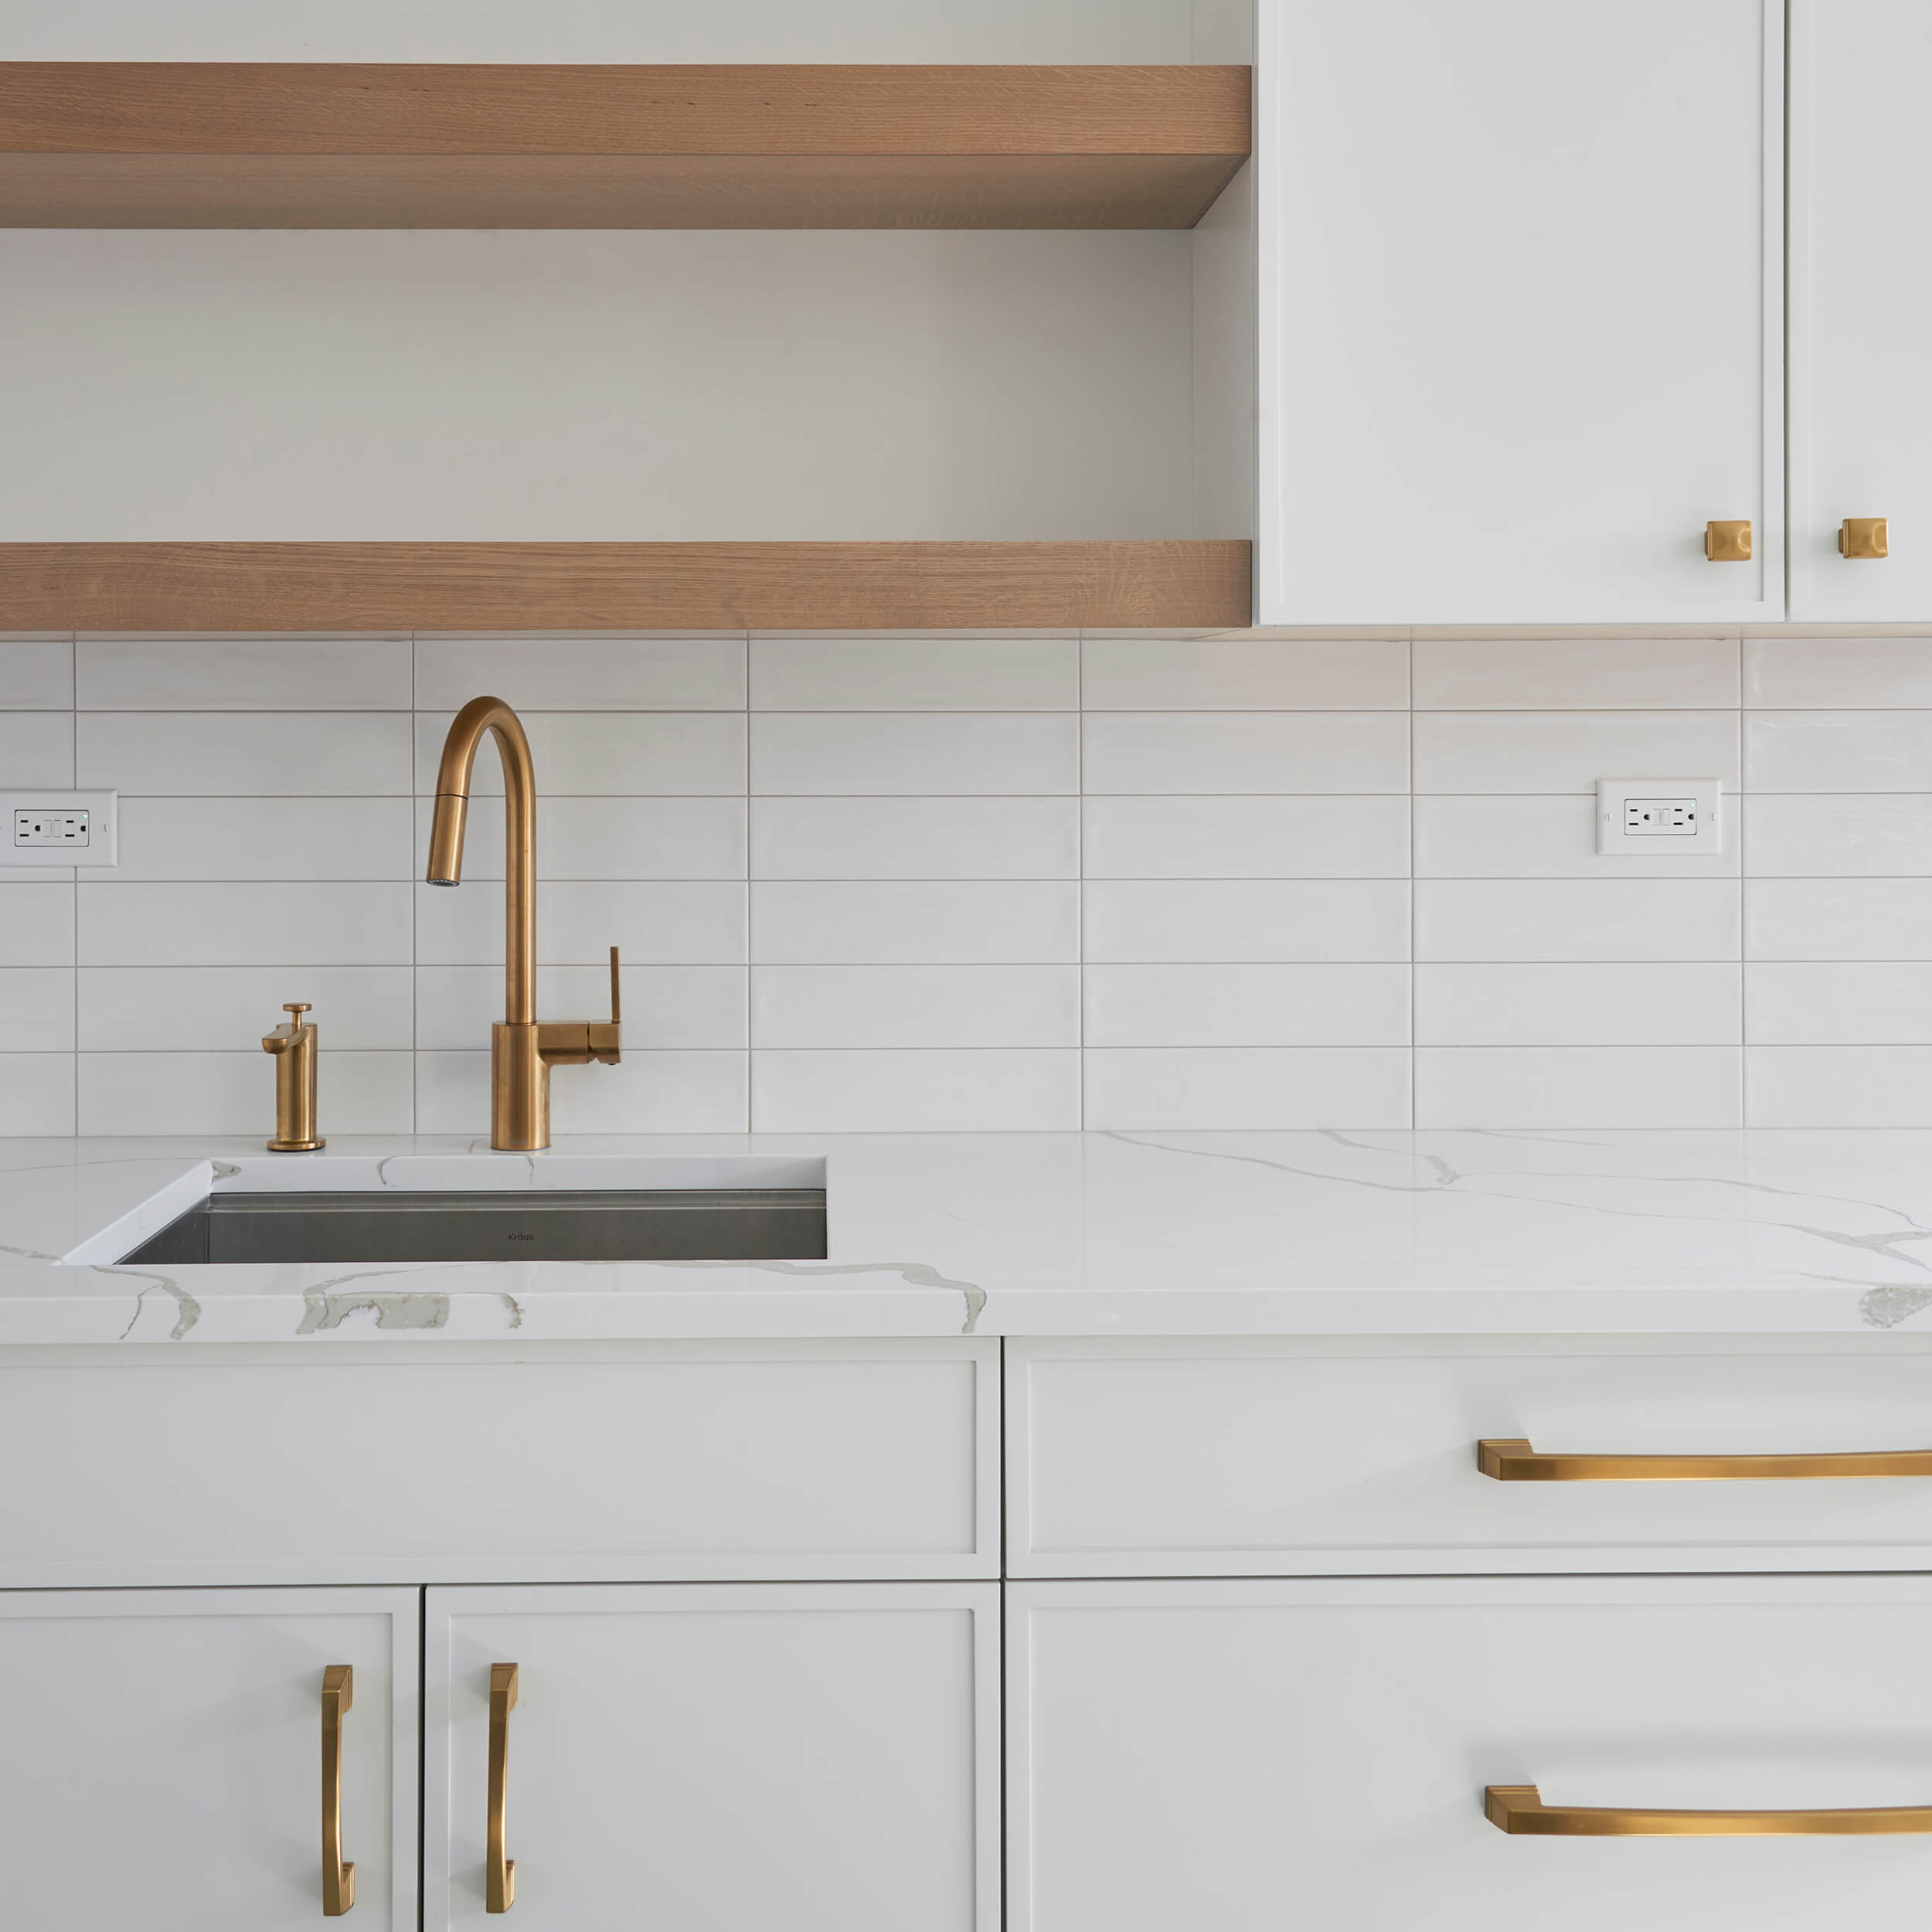 A white on white kitchen with Scandinavian style featuring white painted cabinets and white tile backsplash with light wood floating shelves above the kitchen sink.